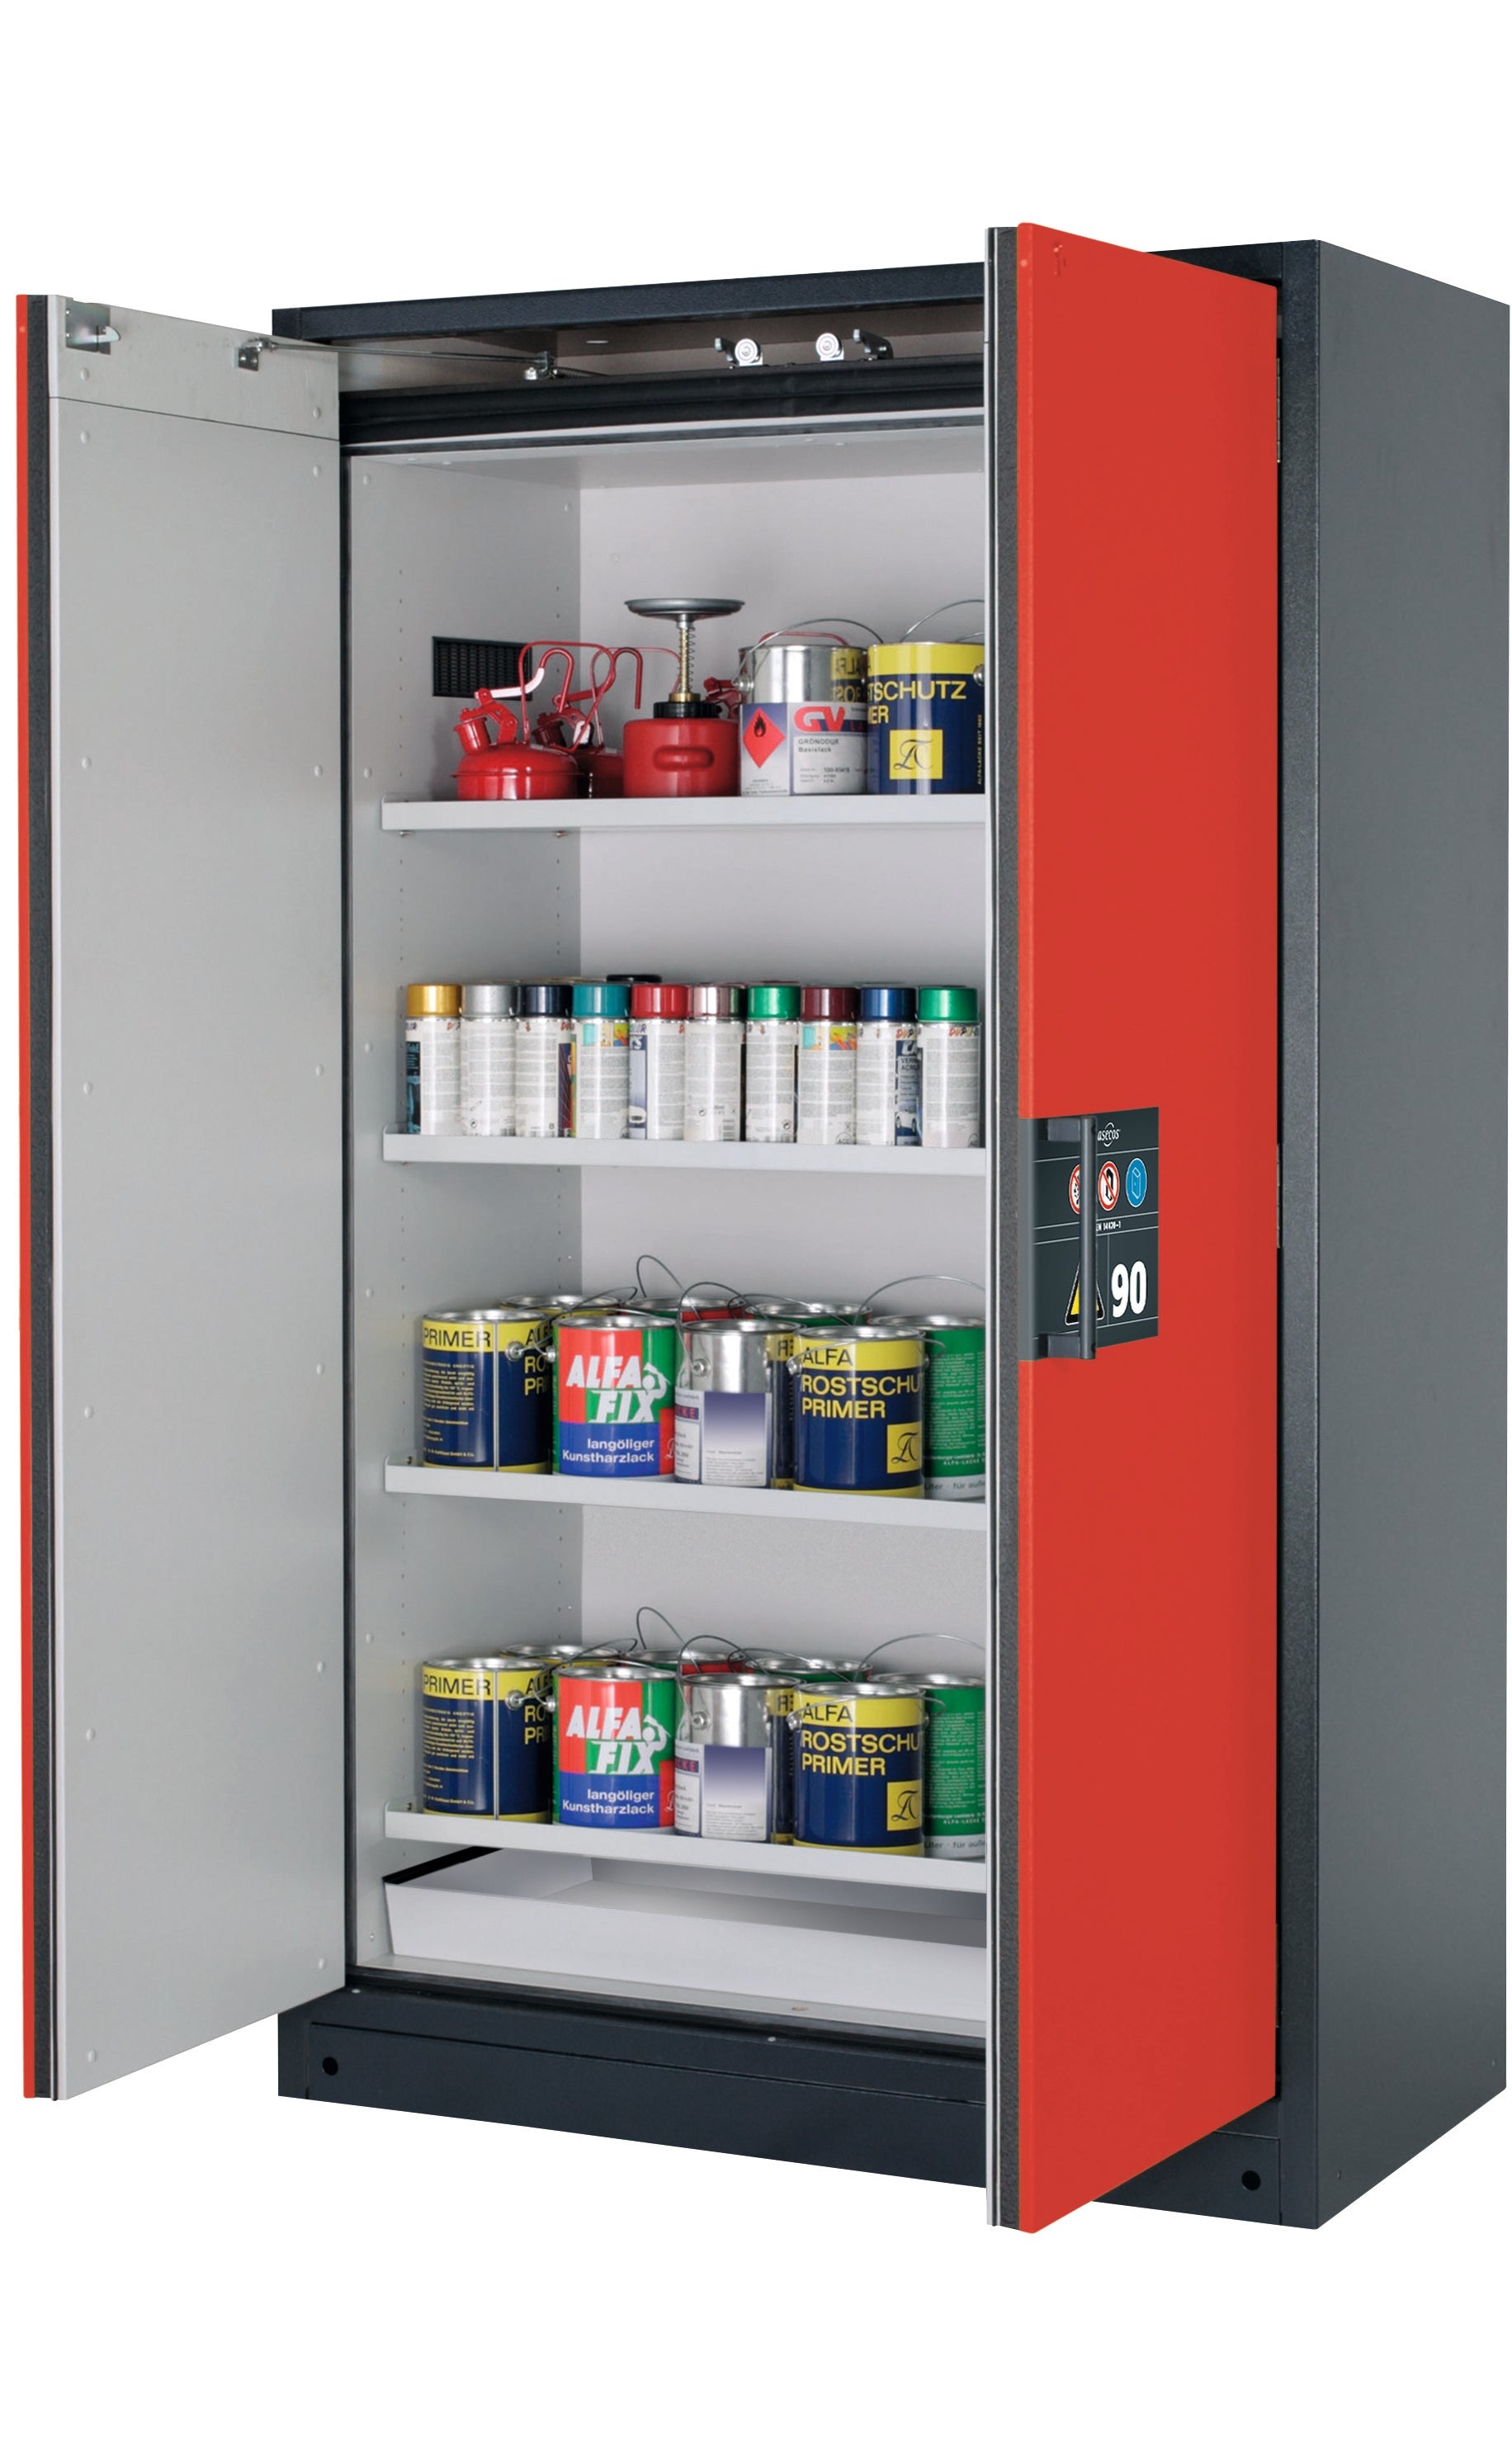 Type 90 safety storage cabinet Q-CLASSIC-90 model Q90.195.120 in traffic red RAL 3020 with 4x shelf standard (sheet steel),